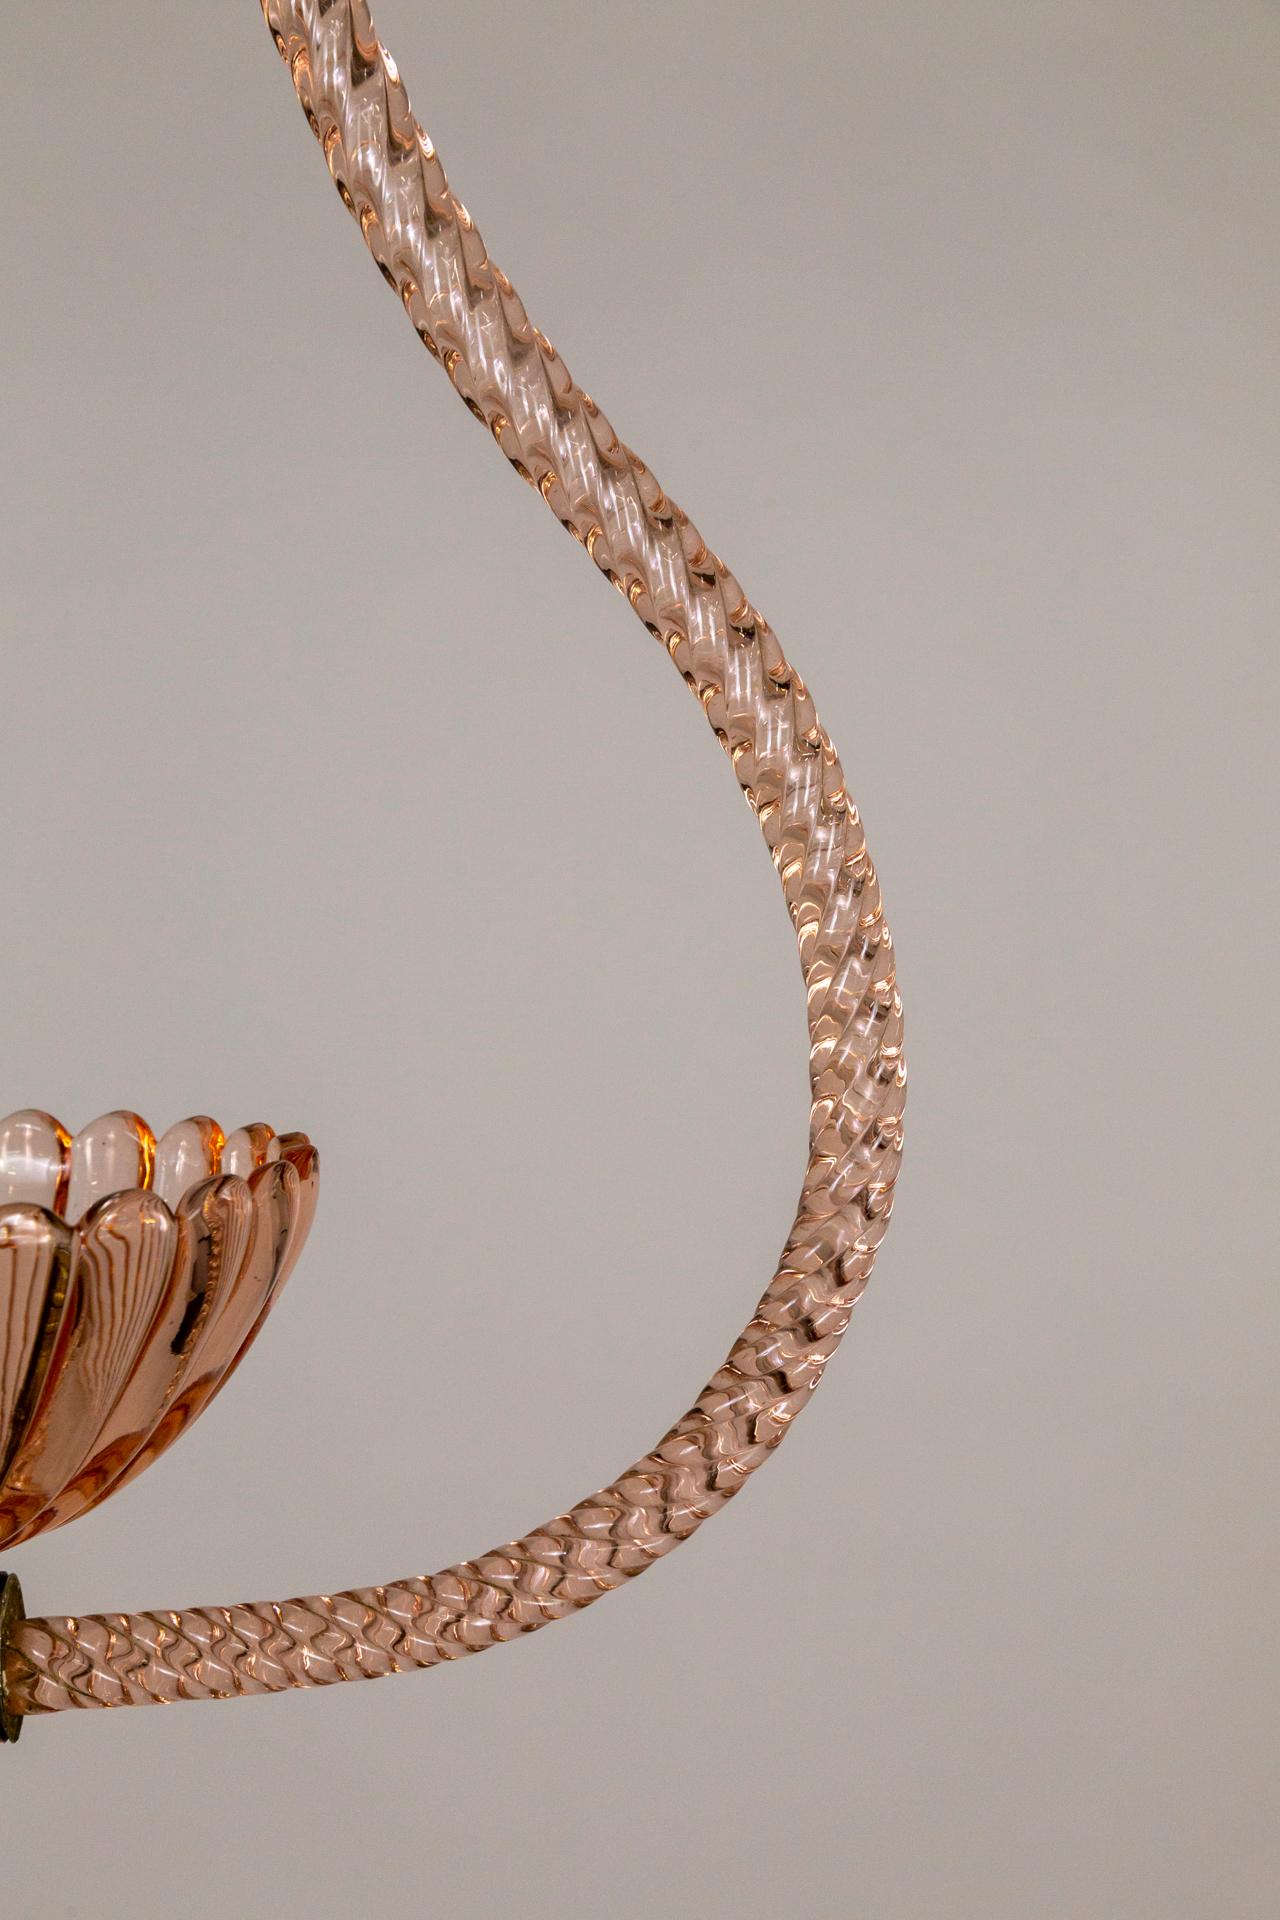 An elegant, modern, Murano glass, pendant light by Barovier & Toso circa 1940-1950. A simple, linear design: translucent pink, twisted-rope stem and frame holding a flora bowl up-light. With bronze-toned, brass canopy and bands connecting the frame